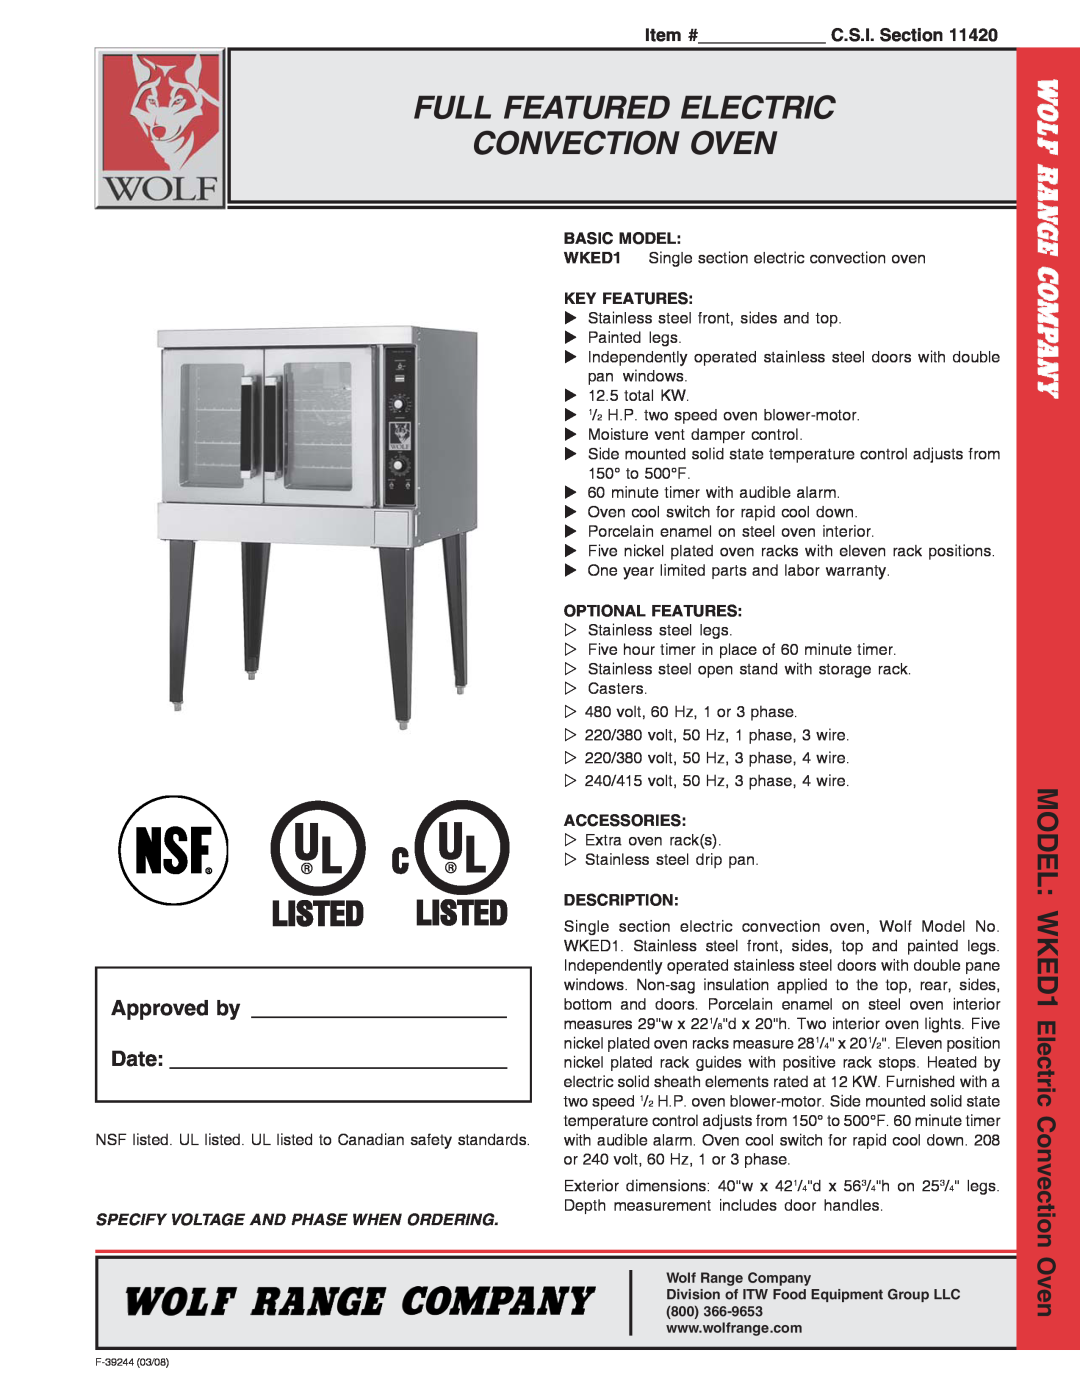 Wolf warranty Full Featured Electric Convection Oven, MODEL WKED1 Electric Convection, Approved by Date 